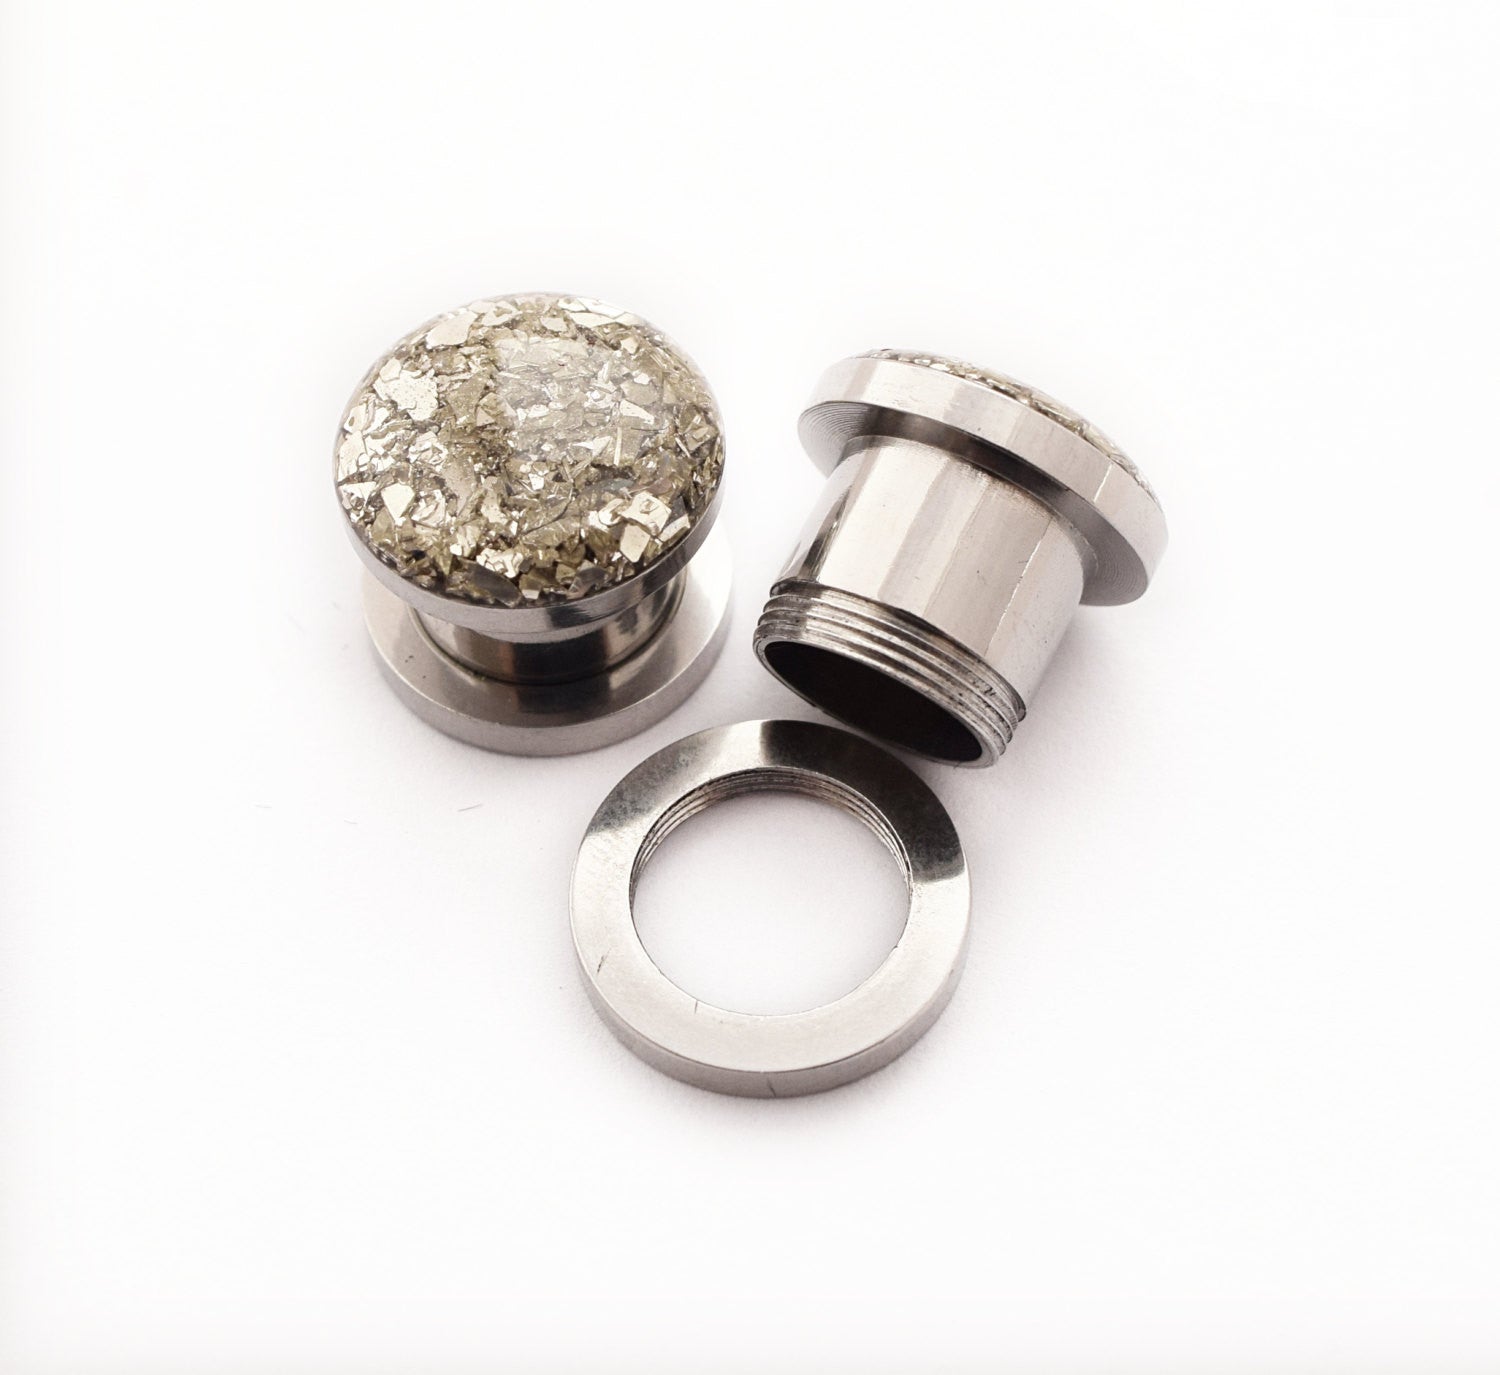 Silver Crushed Glass Plugs - Defiant Jewelry